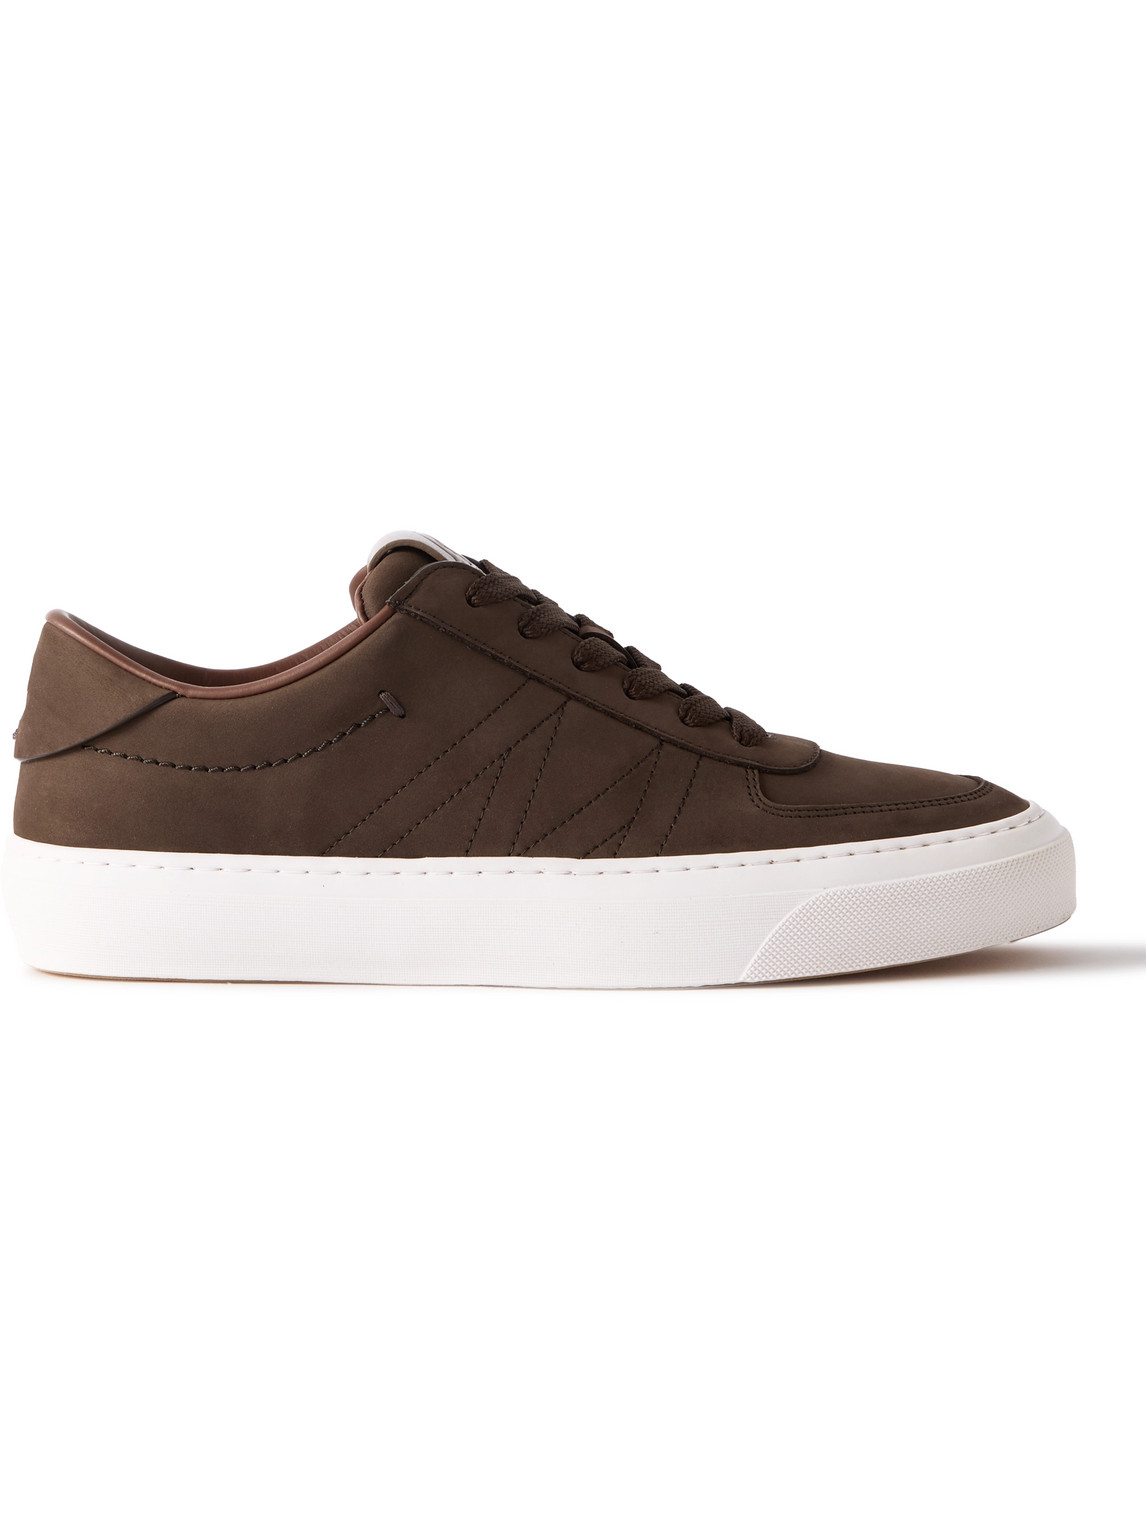 Moncler Monclub Embroidered Suede Sneakers In Brown